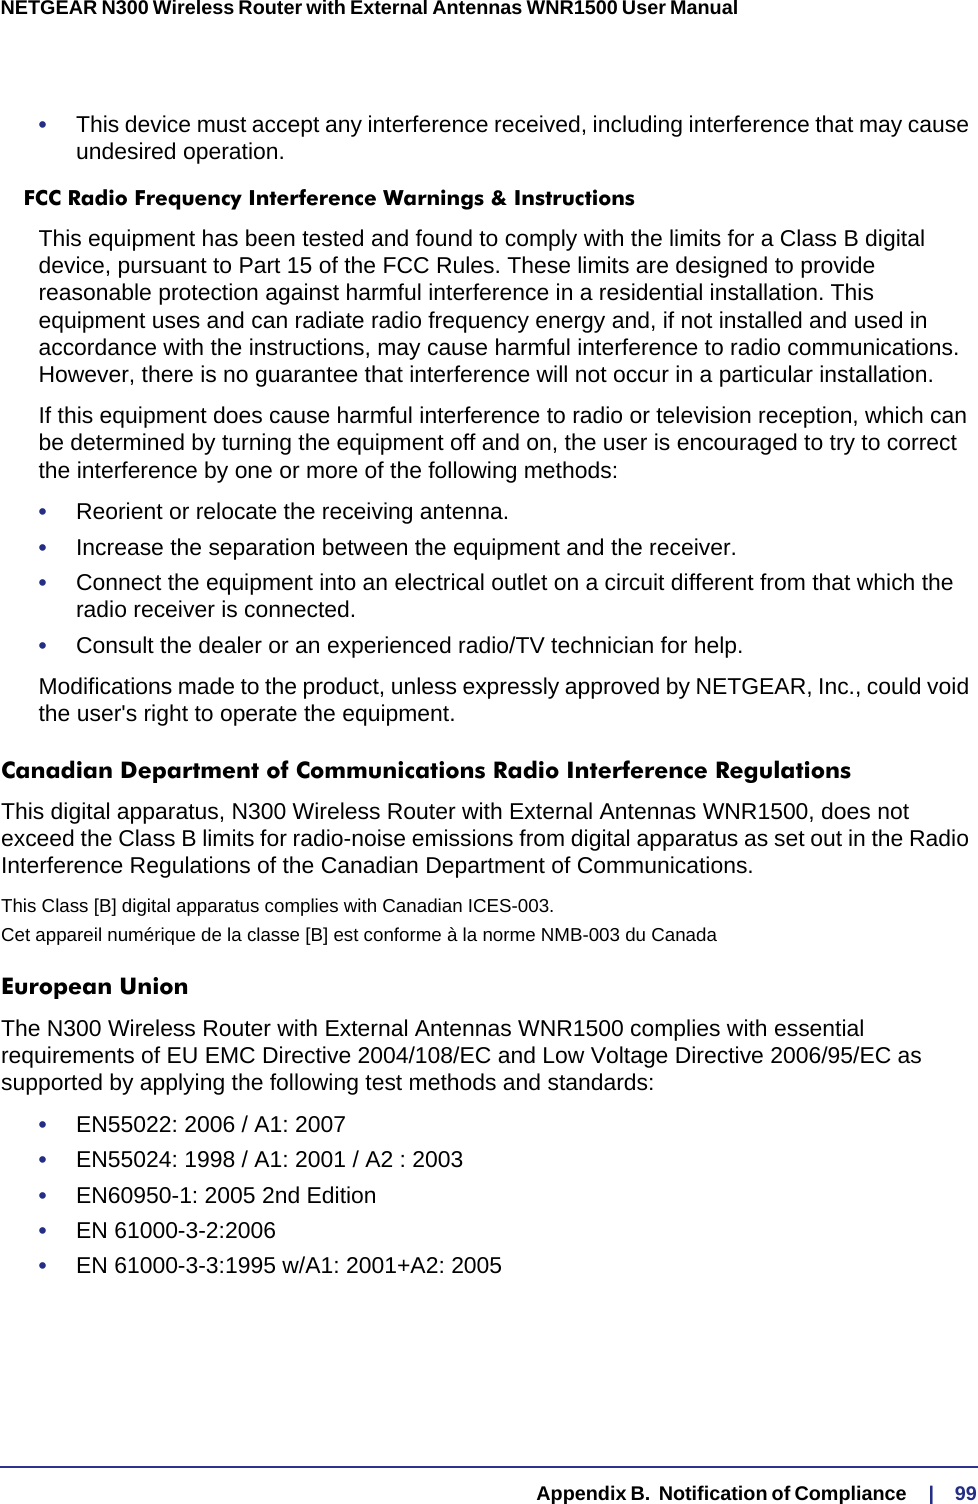   Appendix B.  Notification of Compliance     |    99NETGEAR N300 Wireless Router with External Antennas WNR1500 User Manual •This device must accept any interference received, including interference that may cause undesired operation.FCC Radio Frequency Interference Warnings &amp; InstructionsThis equipment has been tested and found to comply with the limits for a Class B digital device, pursuant to Part 15 of the FCC Rules. These limits are designed to provide reasonable protection against harmful interference in a residential installation. This equipment uses and can radiate radio frequency energy and, if not installed and used in accordance with the instructions, may cause harmful interference to radio communications. However, there is no guarantee that interference will not occur in a particular installation. If this equipment does cause harmful interference to radio or television reception, which can be determined by turning the equipment off and on, the user is encouraged to try to correct the interference by one or more of the following methods:•Reorient or relocate the receiving antenna.•Increase the separation between the equipment and the receiver.•Connect the equipment into an electrical outlet on a circuit different from that which the radio receiver is connected.•Consult the dealer or an experienced radio/TV technician for help.Modifications made to the product, unless expressly approved by NETGEAR, Inc., could void the user&apos;s right to operate the equipment.Canadian Department of Communications Radio Interference RegulationsThis digital apparatus, N300 Wireless Router with External Antennas WNR1500, does not exceed the Class B limits for radio-noise emissions from digital apparatus as set out in the Radio Interference Regulations of the Canadian Department of Communications.This Class [B] digital apparatus complies with Canadian ICES-003.Cet appareil numérique de la classe [B] est conforme à la norme NMB-003 du CanadaEuropean UnionThe N300 Wireless Router with External Antennas WNR1500 complies with essential requirements of EU EMC Directive 2004/108/EC and Low Voltage Directive 2006/95/EC as supported by applying the following test methods and standards:•EN55022: 2006 / A1: 2007•EN55024: 1998 / A1: 2001 / A2 : 2003•EN60950-1: 2005 2nd Edition•EN 61000-3-2:2006•EN 61000-3-3:1995 w/A1: 2001+A2: 2005